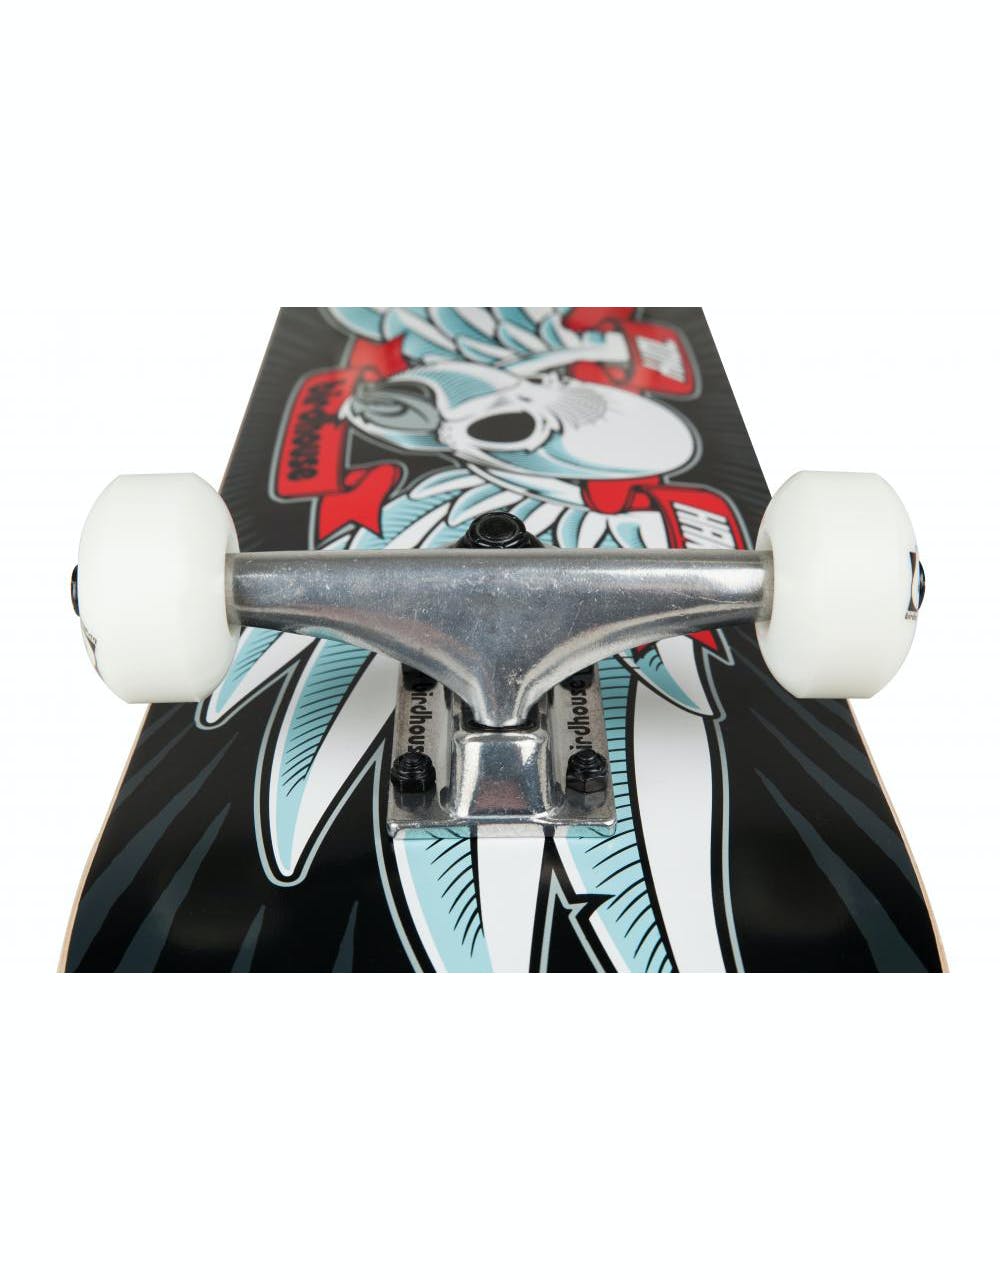 Birdhouse Flying Falcon Stage 1 Complete Skateboard - 7.5"